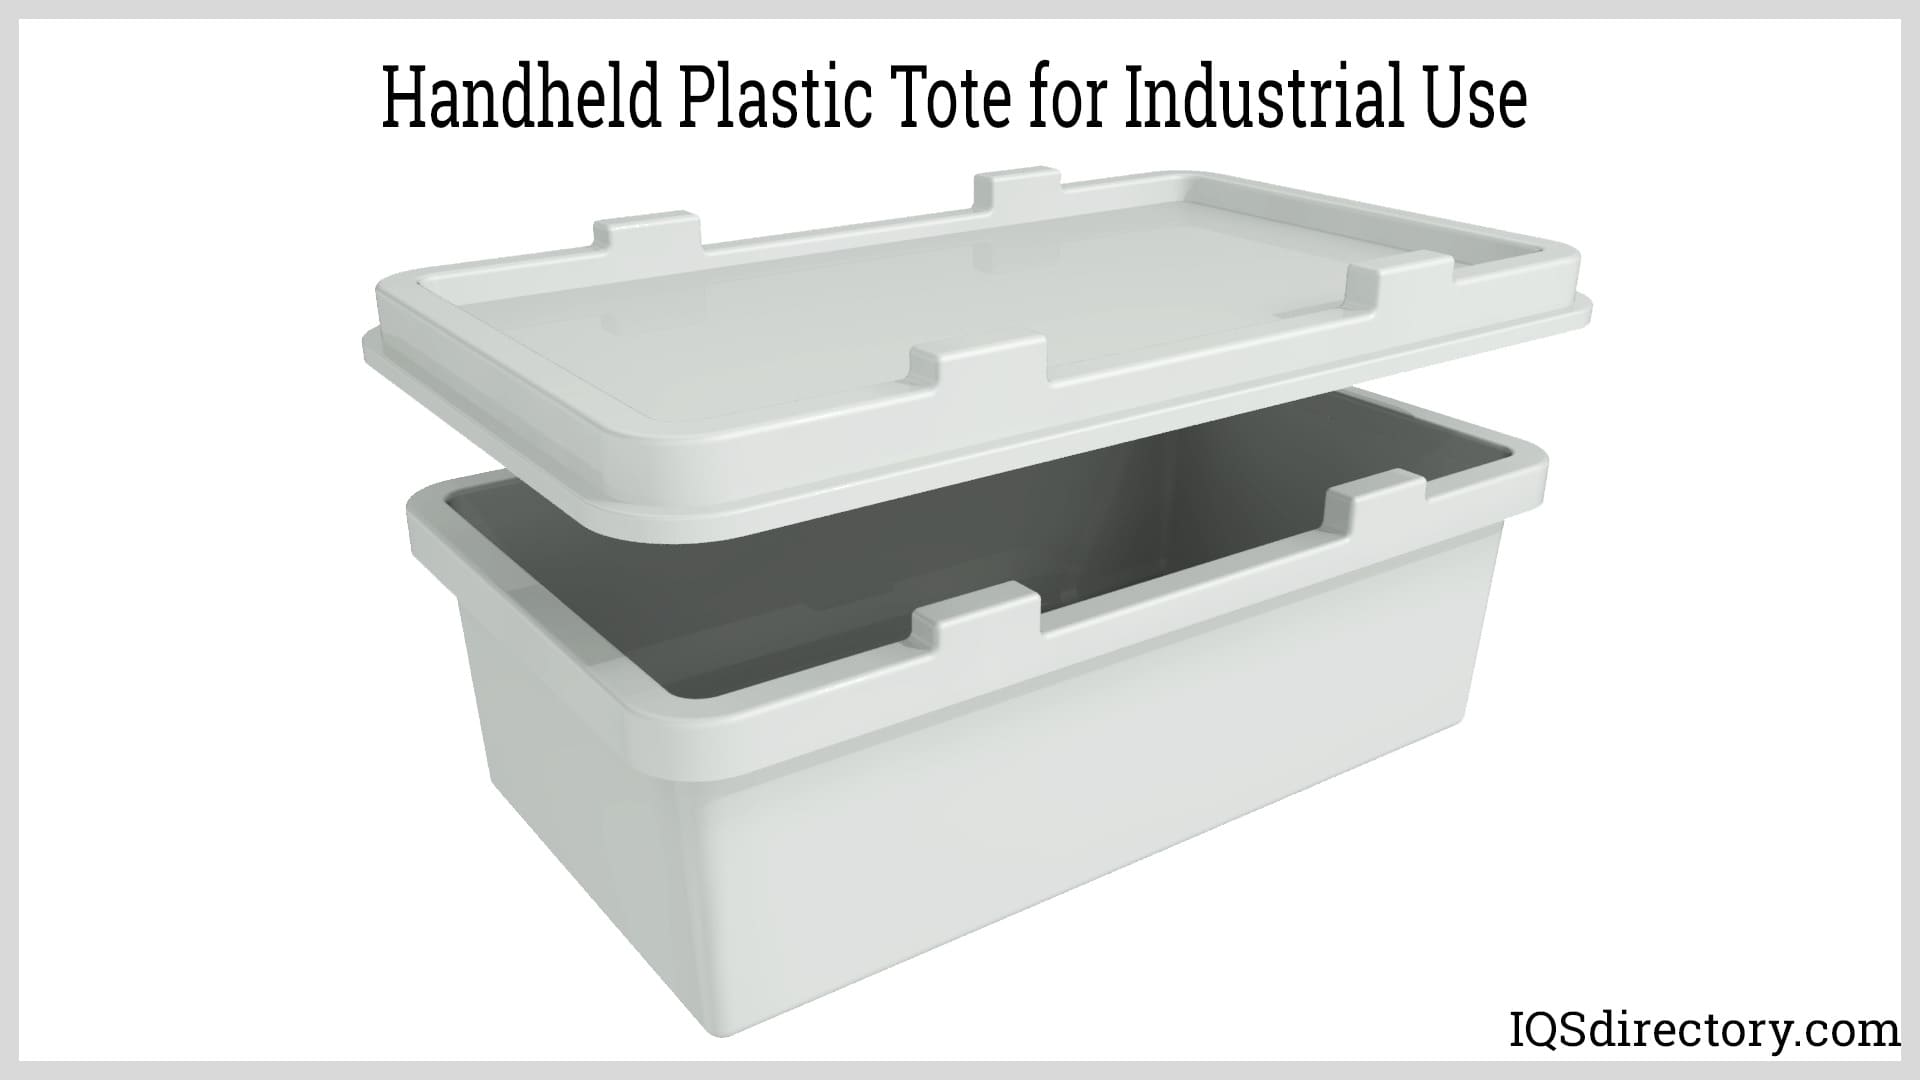 Handheld Plastic Tote for Industrial Use